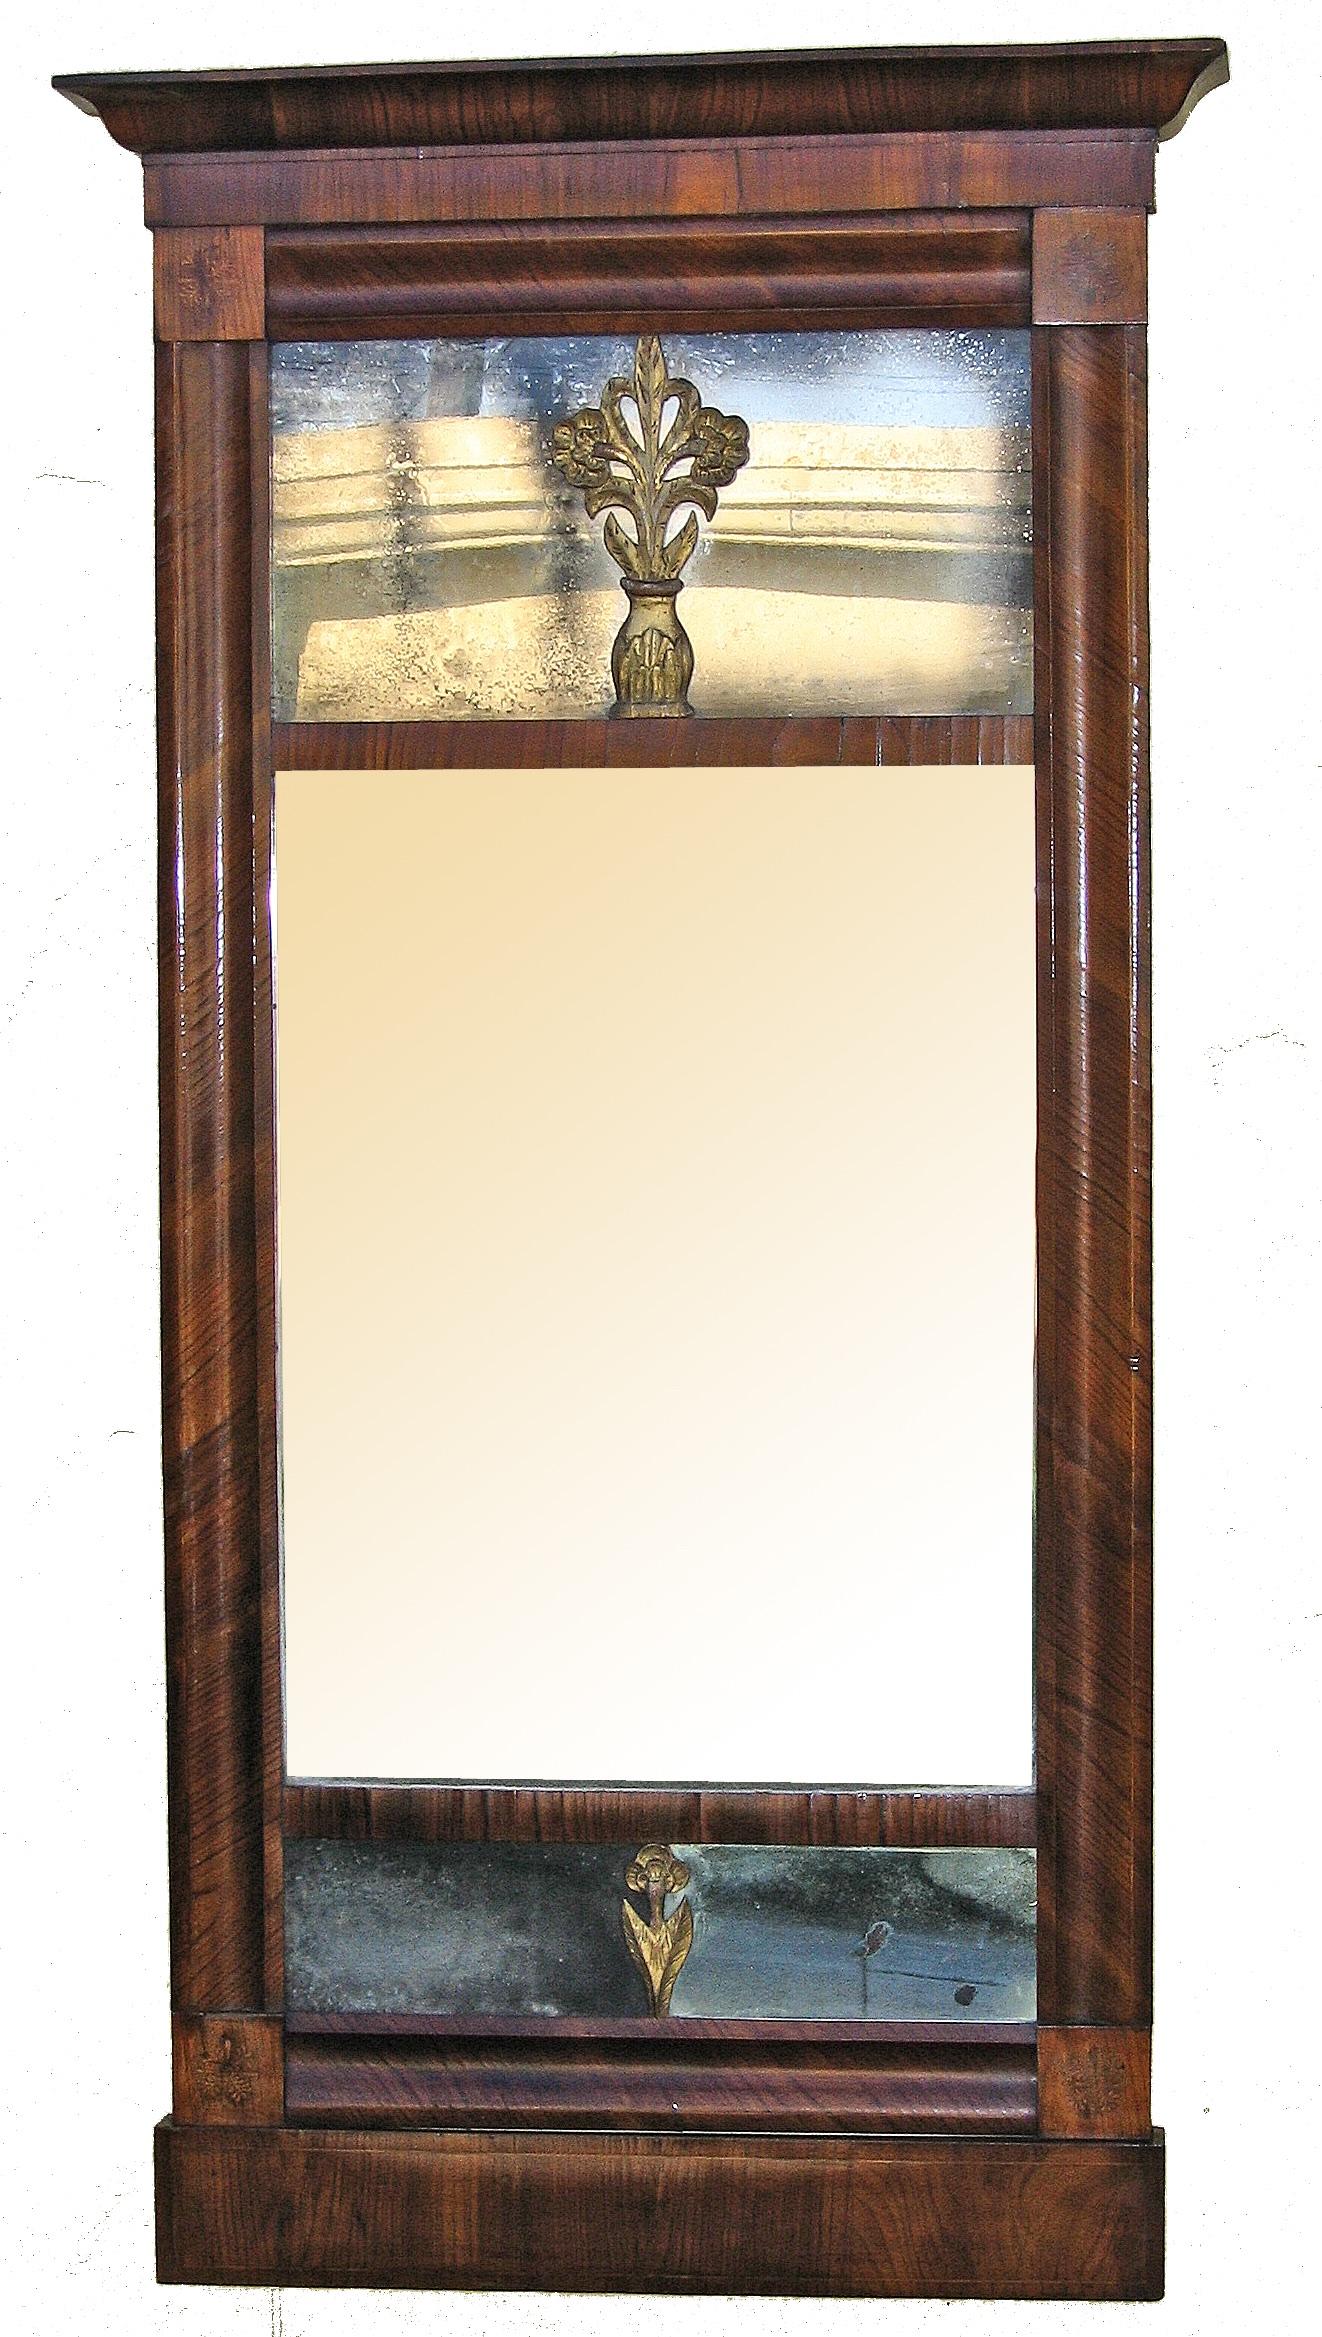 Biedermeier highly figured mahogany pier mirror, c1800. Original mirror plate and back. The mirror has carved gessoed and gilded wood mounts. The corners are inlaid with satinwood, floral inlay. 
Upper plate is 20.5